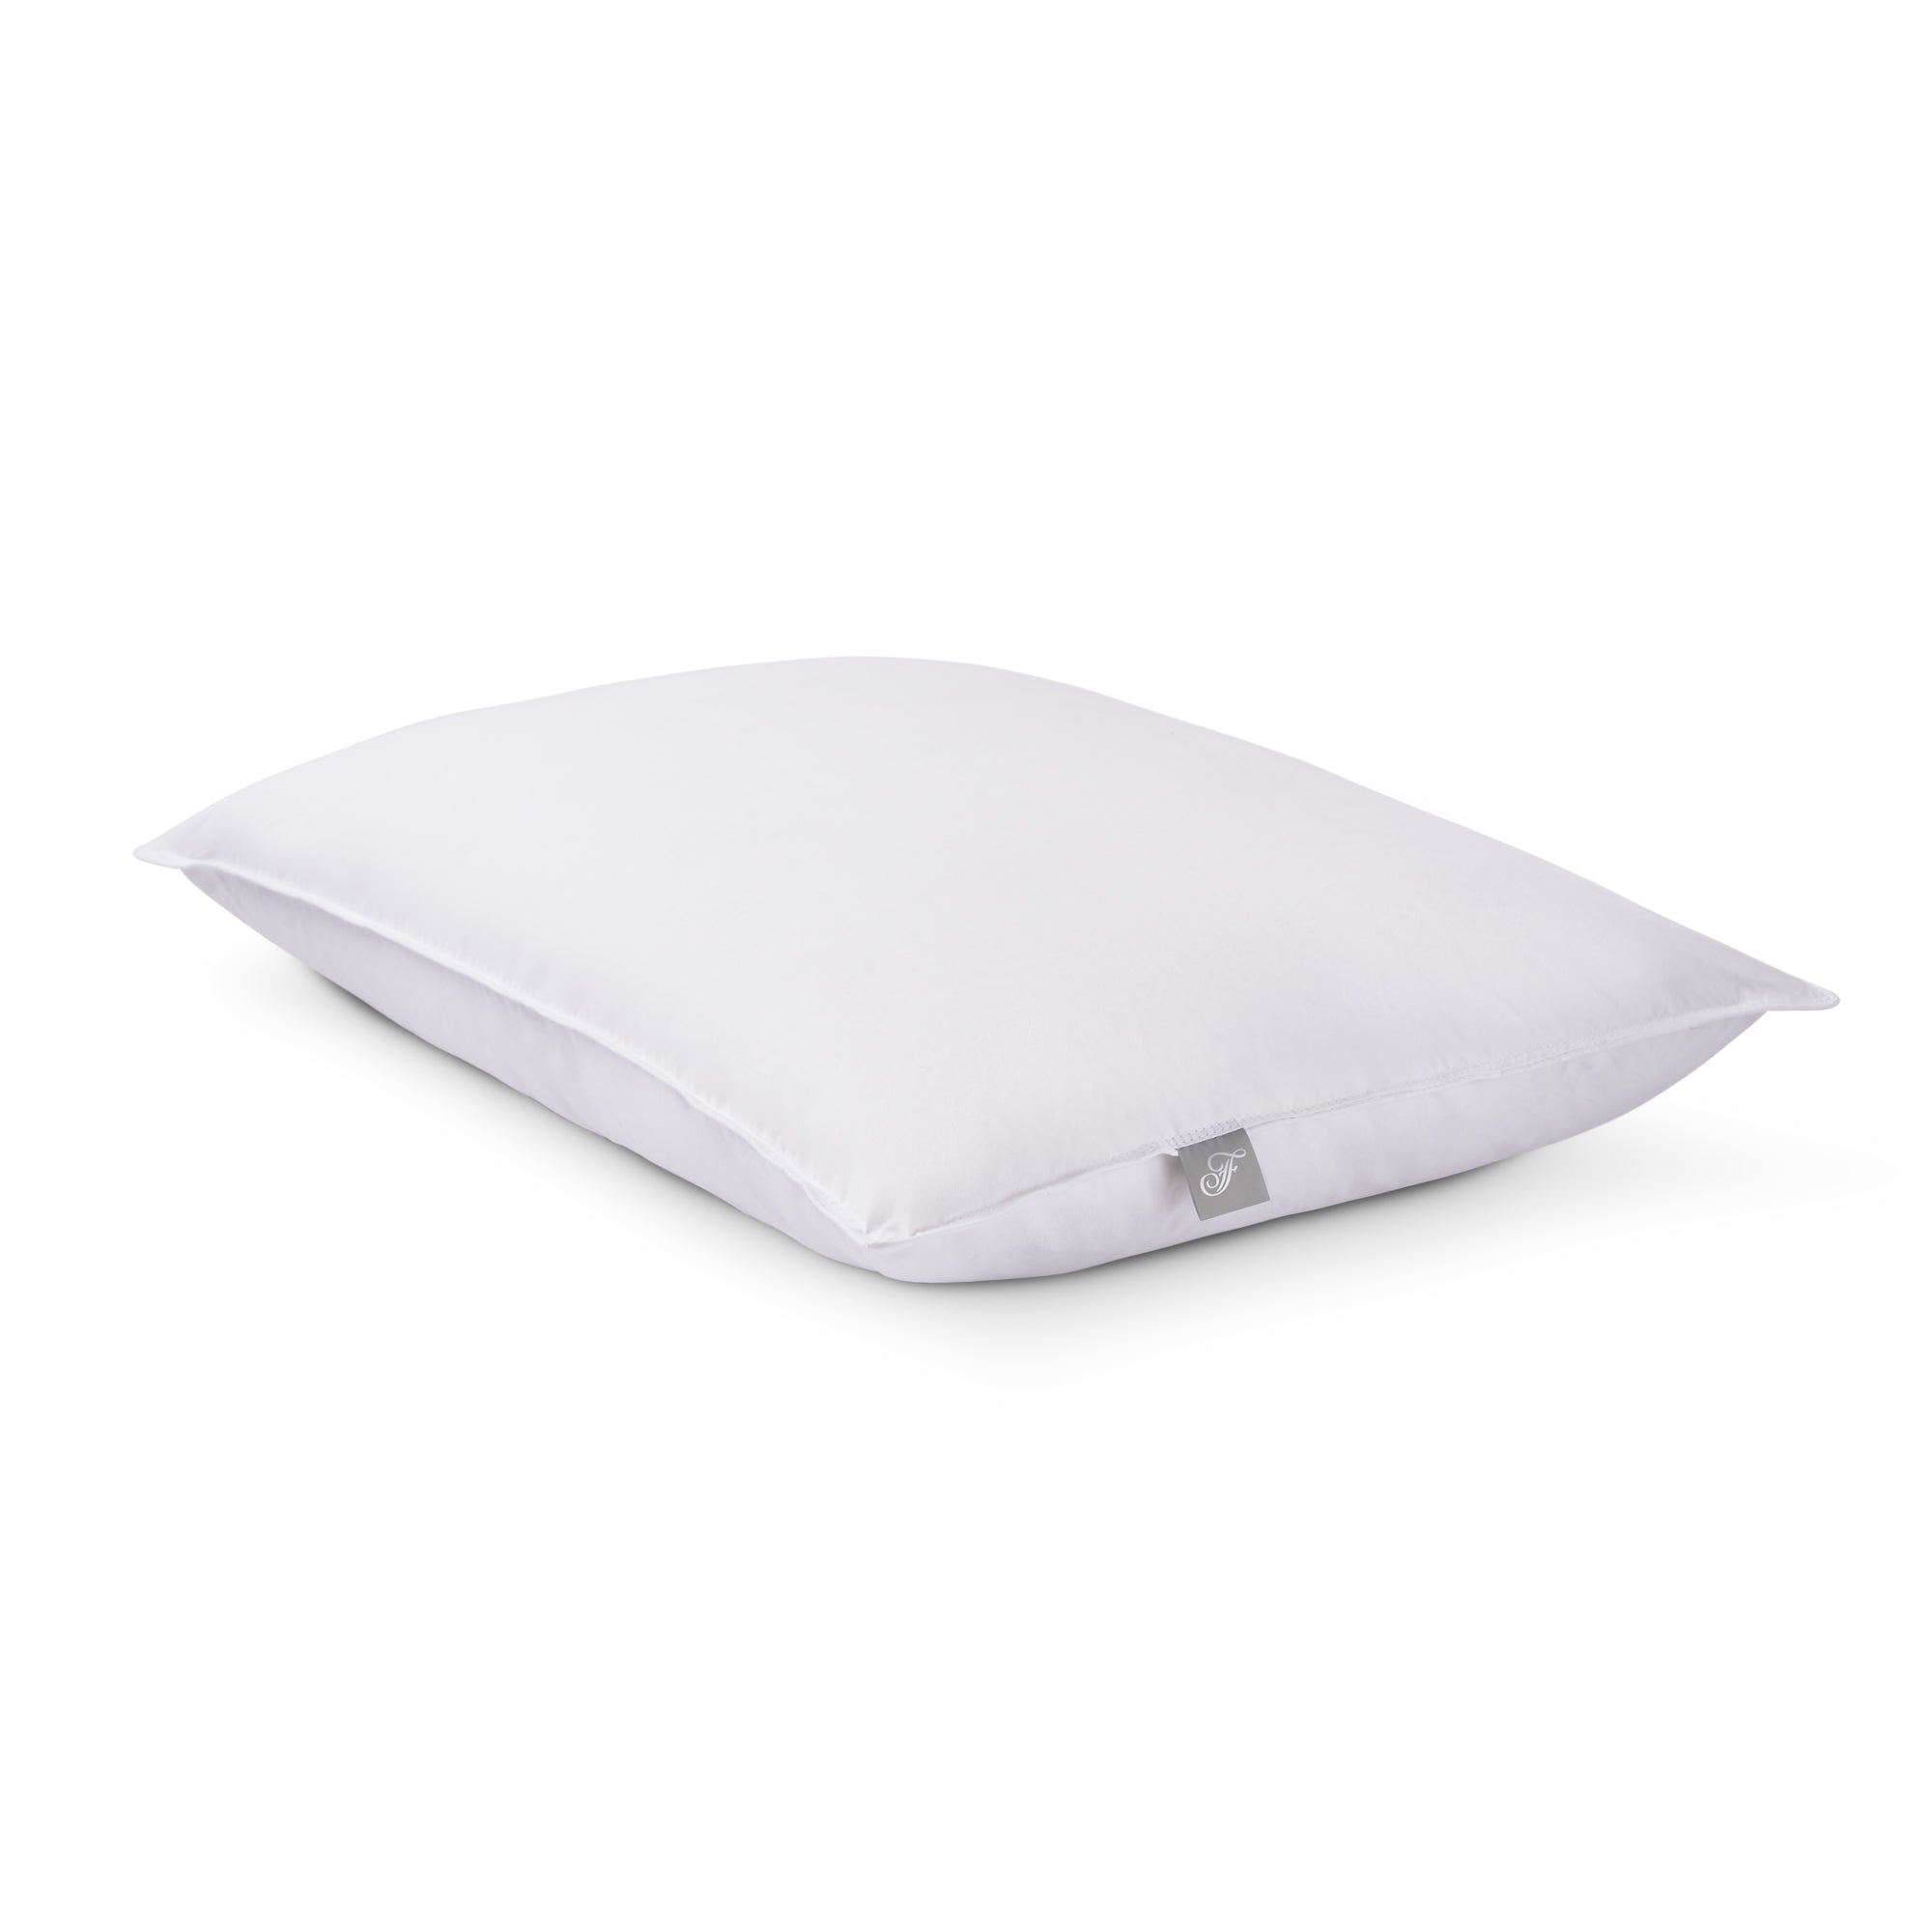 Feather & Down Pillow